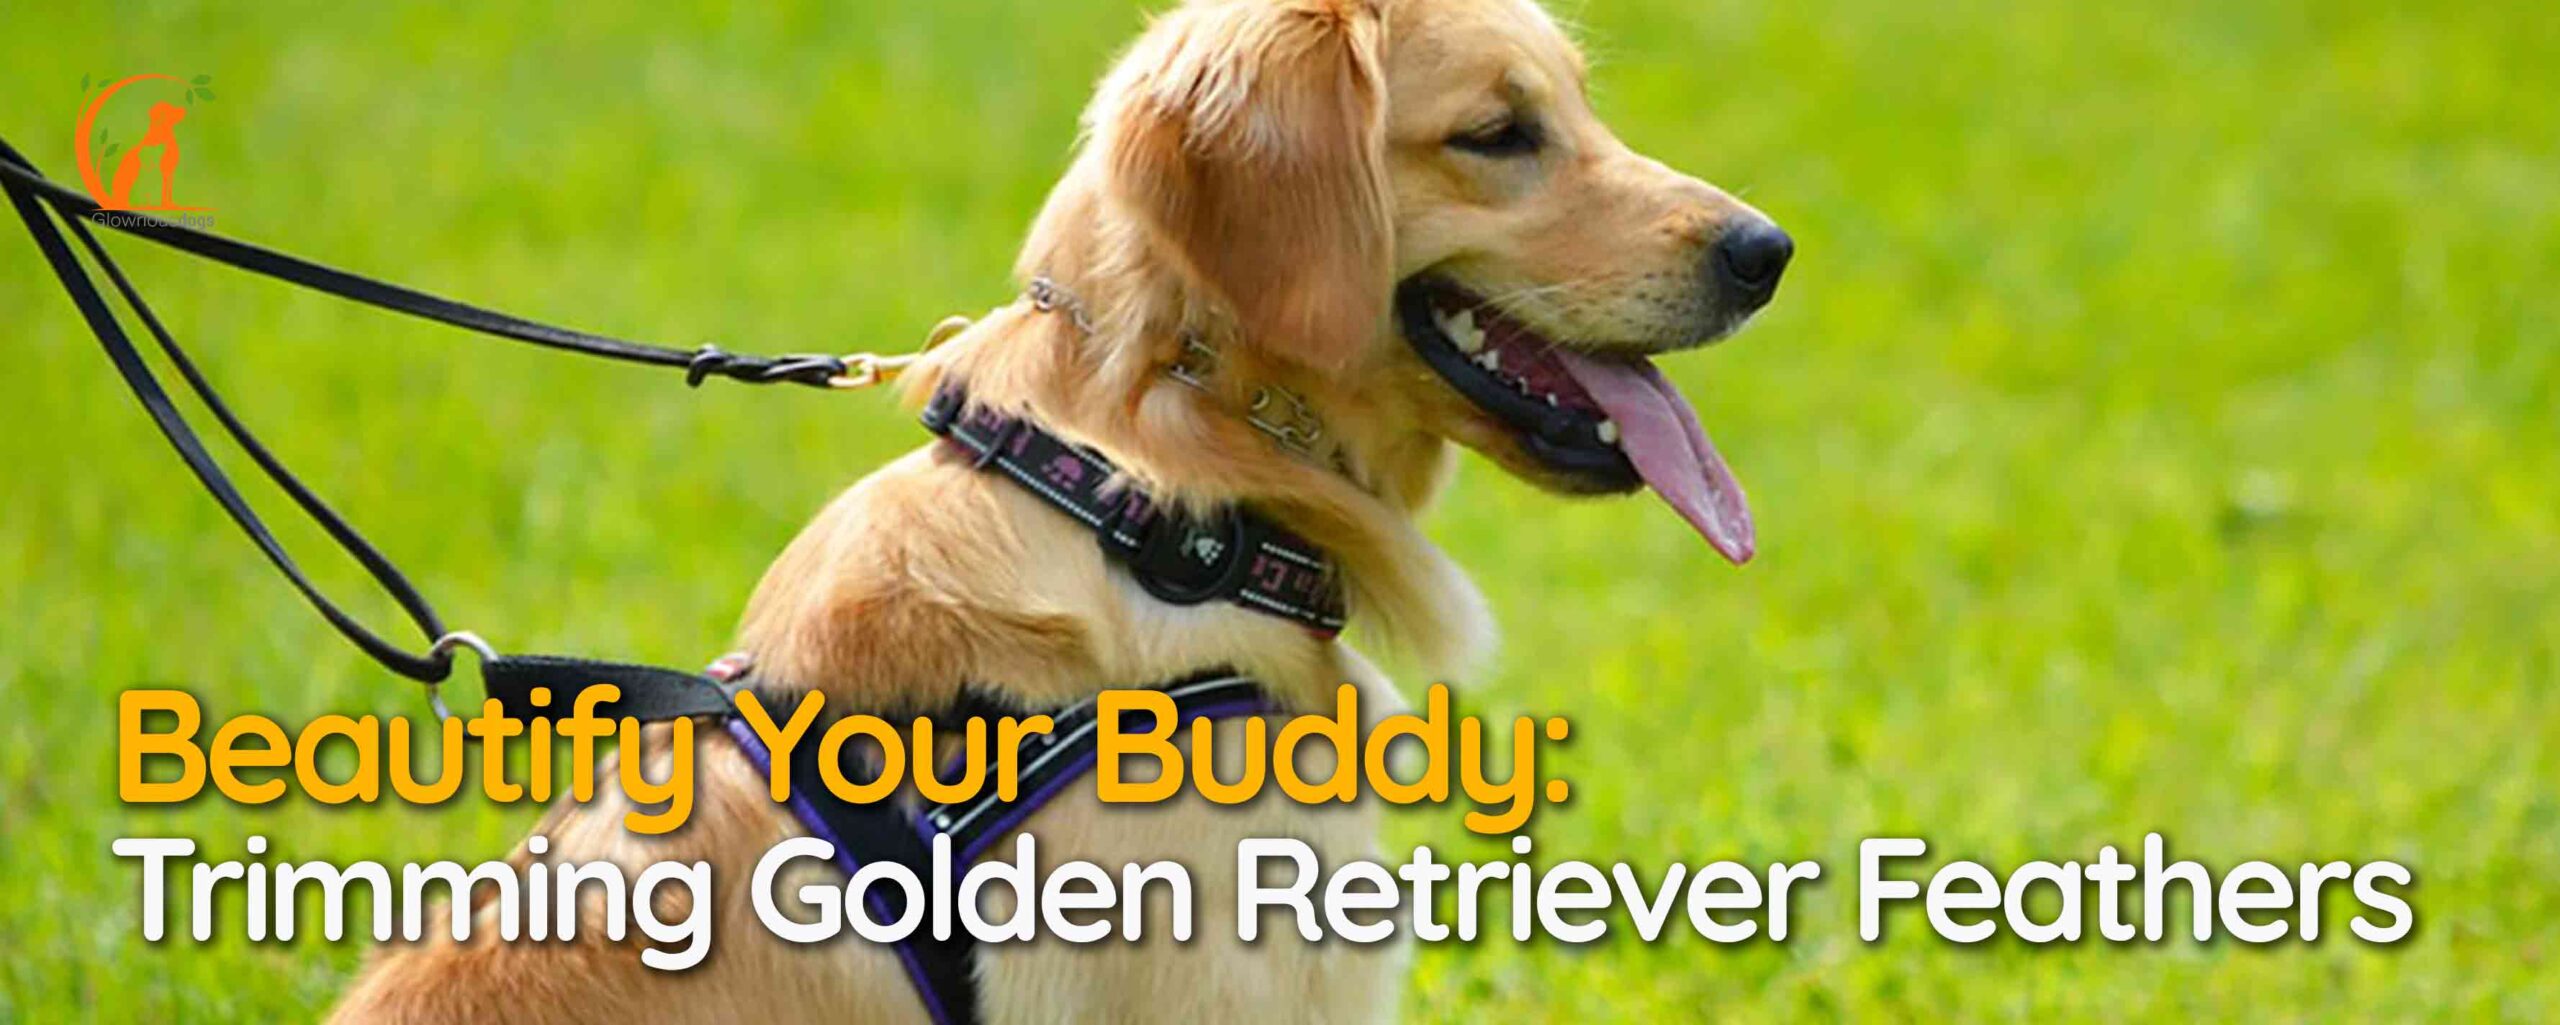 Beautify Your Buddy: Trimming Golden Retriever Feathers